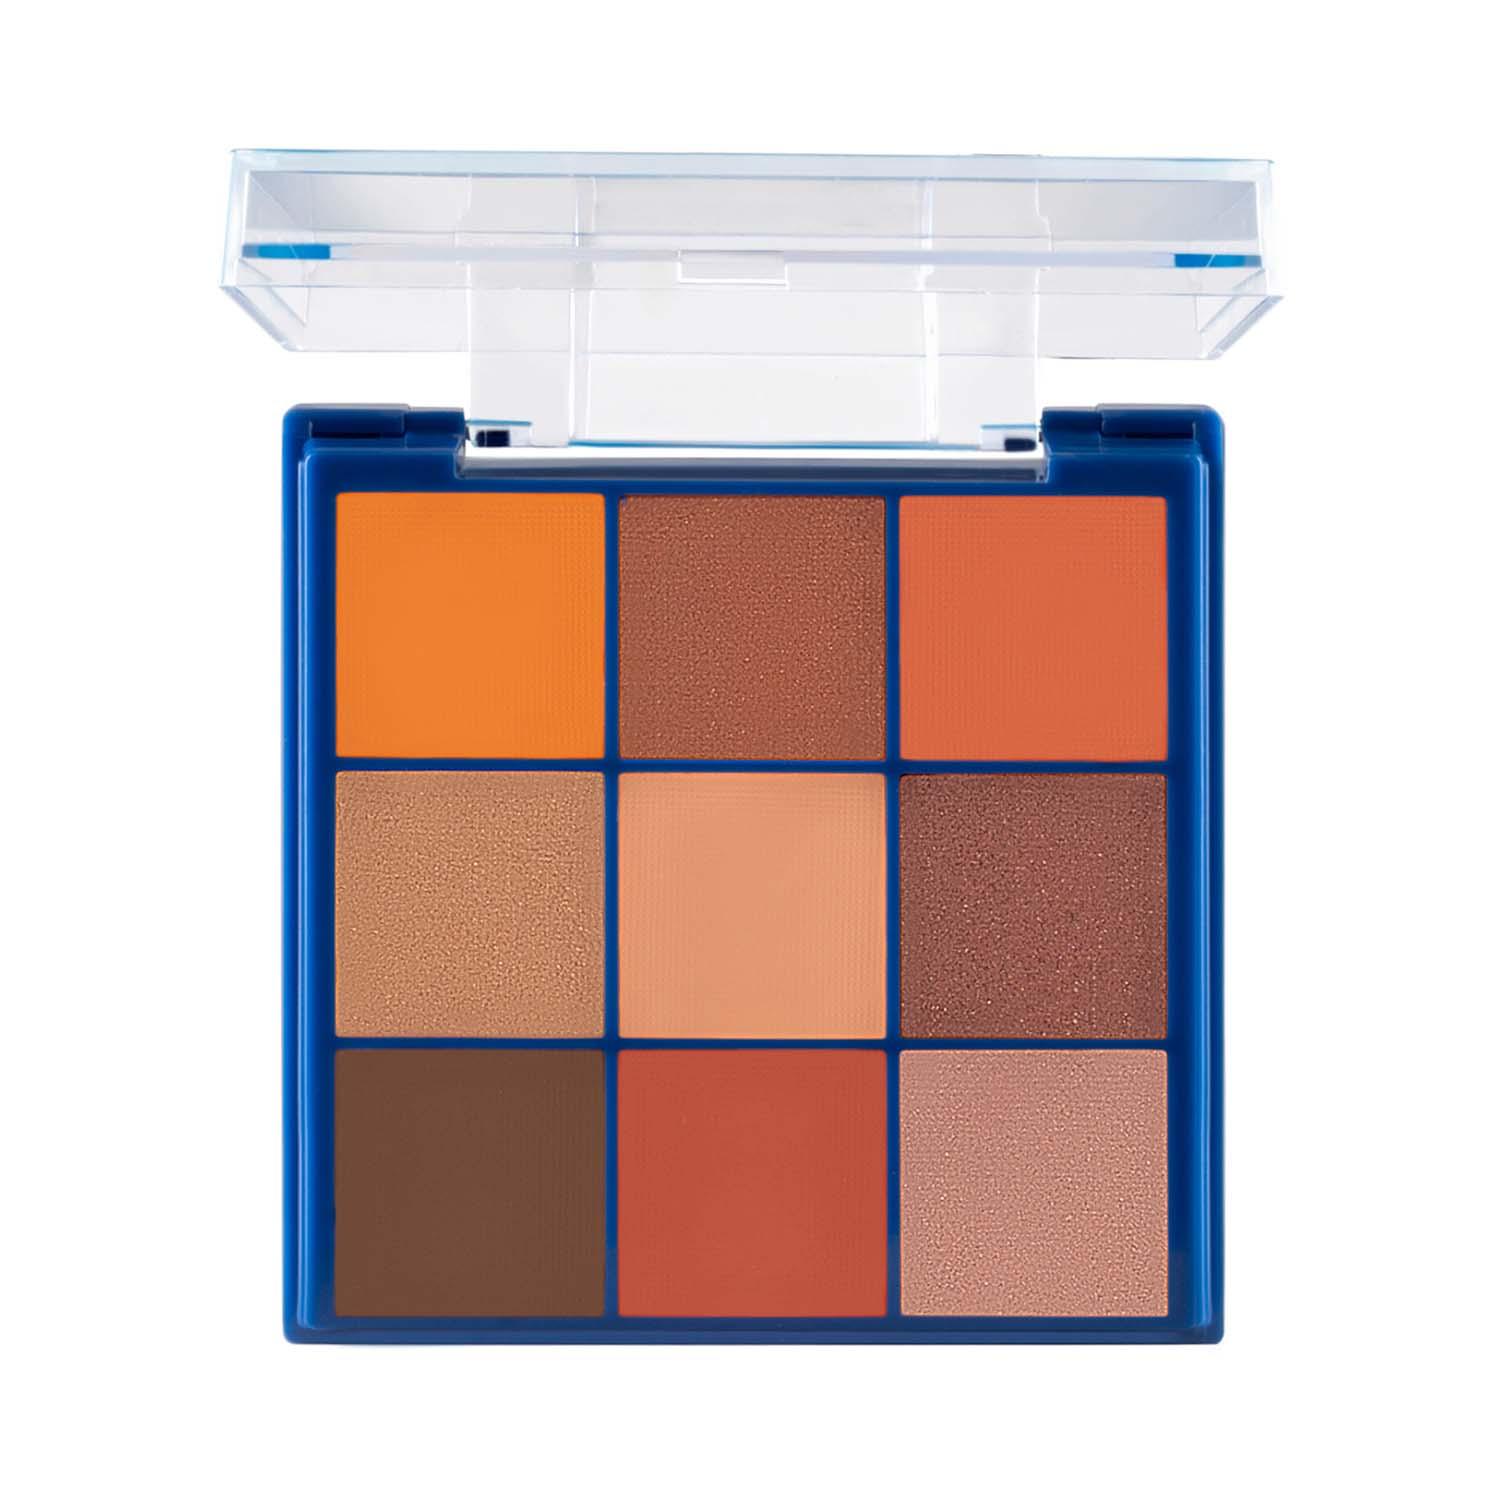 MARS | MARS Makeup Kit With 9 Highly Pigmented Eyeshadows, Blusher And Highlighter - 01 (16g)